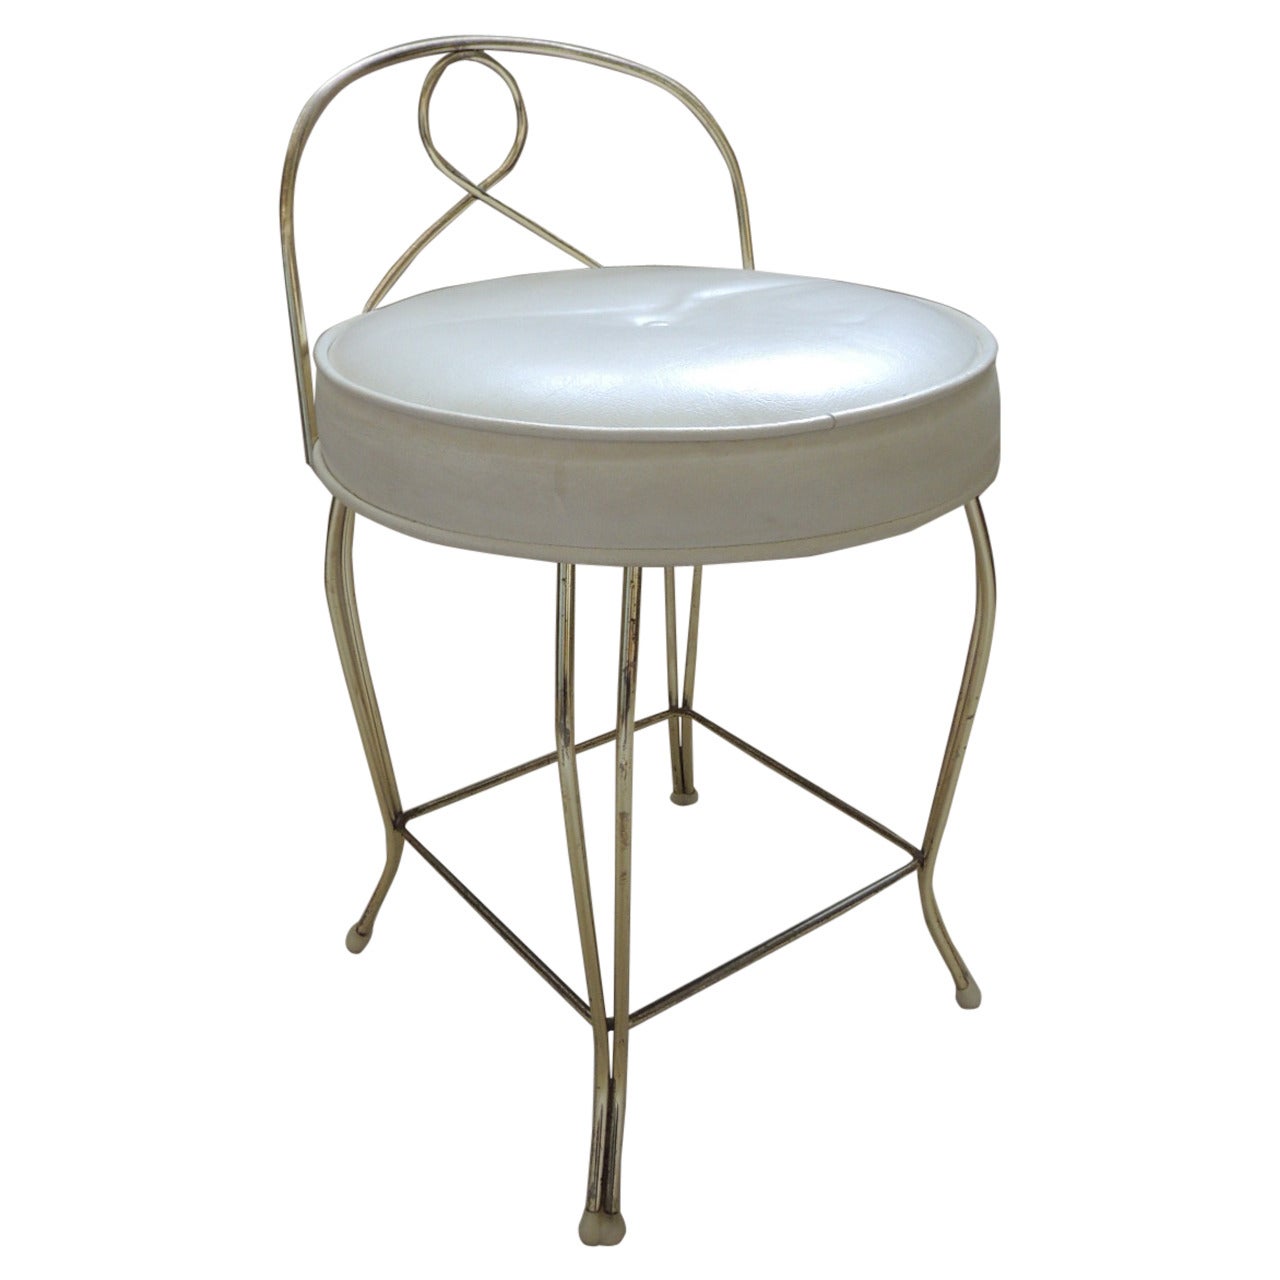 Vintage Round Brass Art Deco Vanity Stool with Upholstered Seat